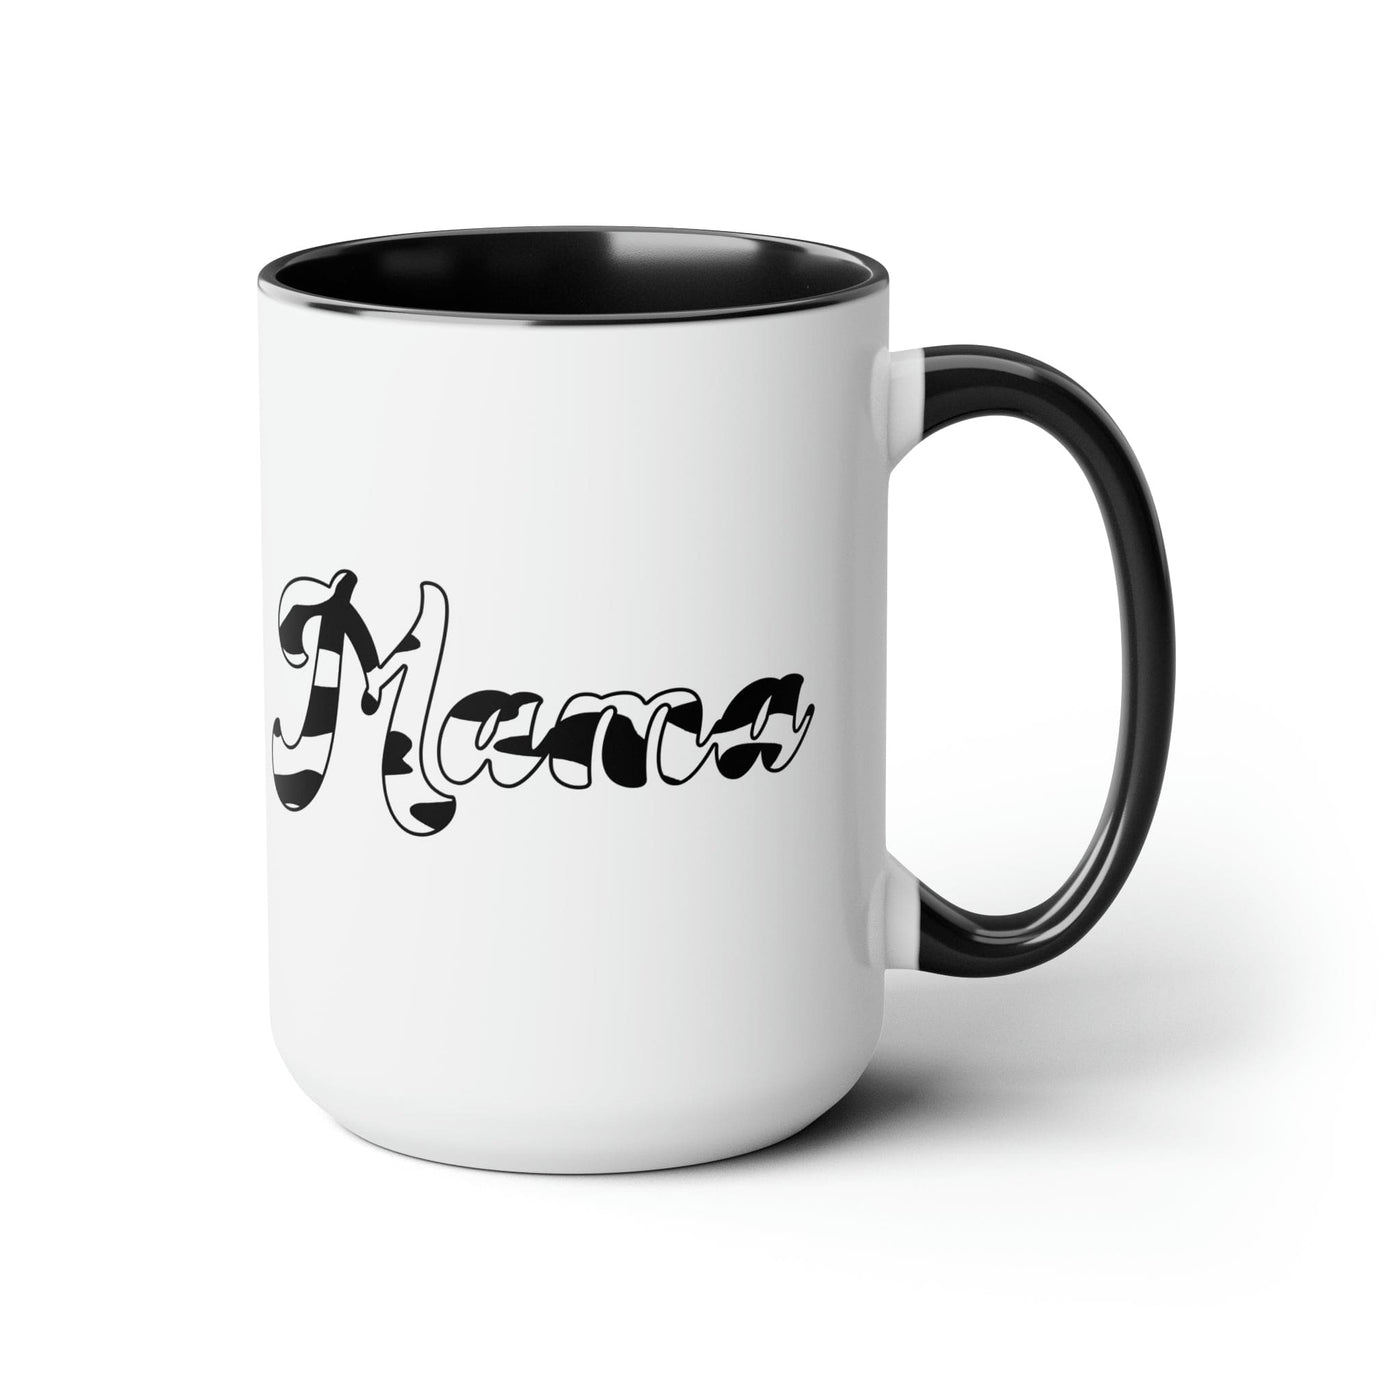 Accent Ceramic Coffee Mug 15oz - Black And White Abstract Mama Pattern